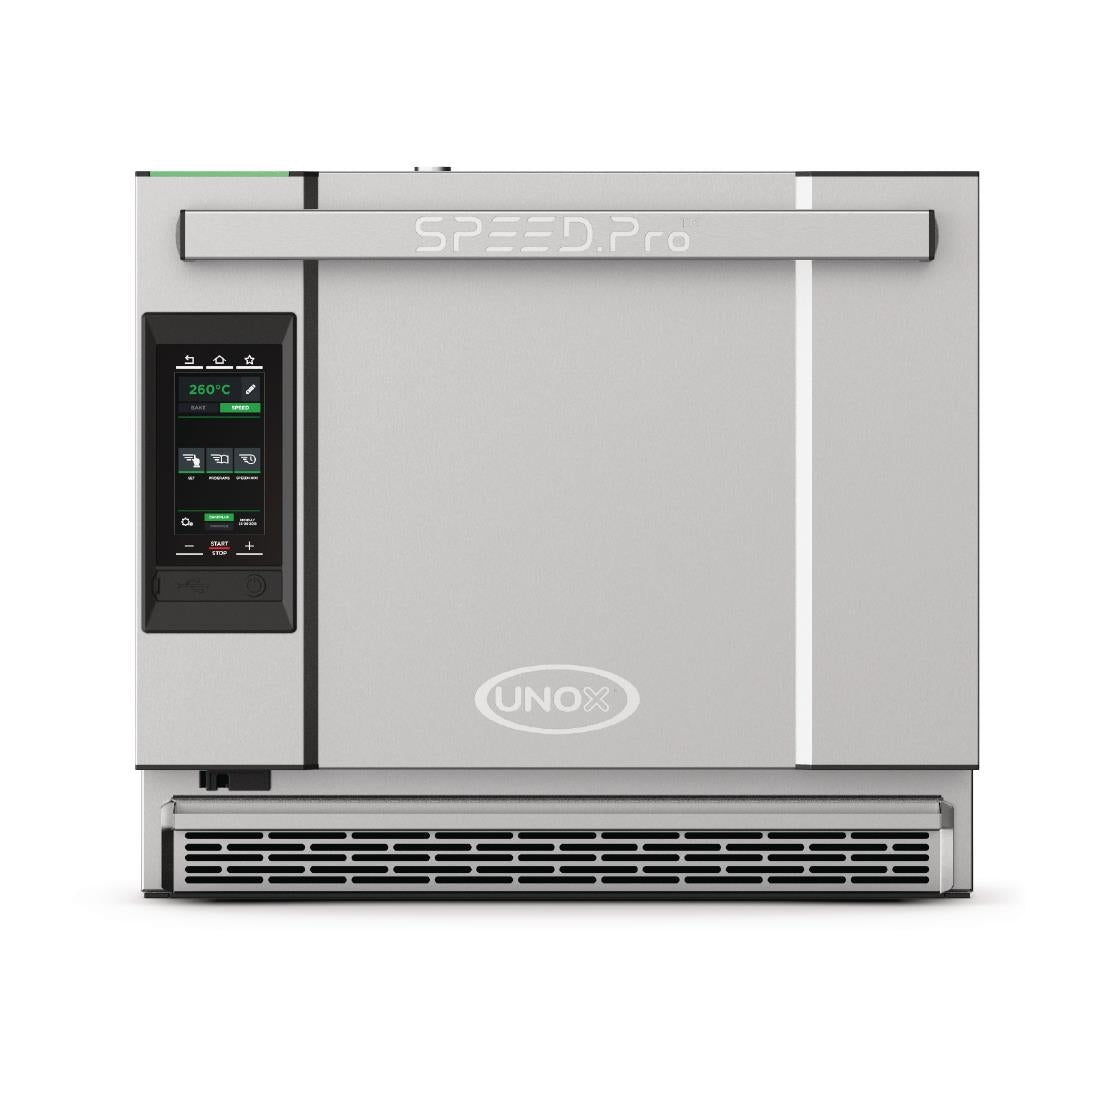 FS003 Unox Bakerlux Speed Pro High Speed Oven 15A Single Phase